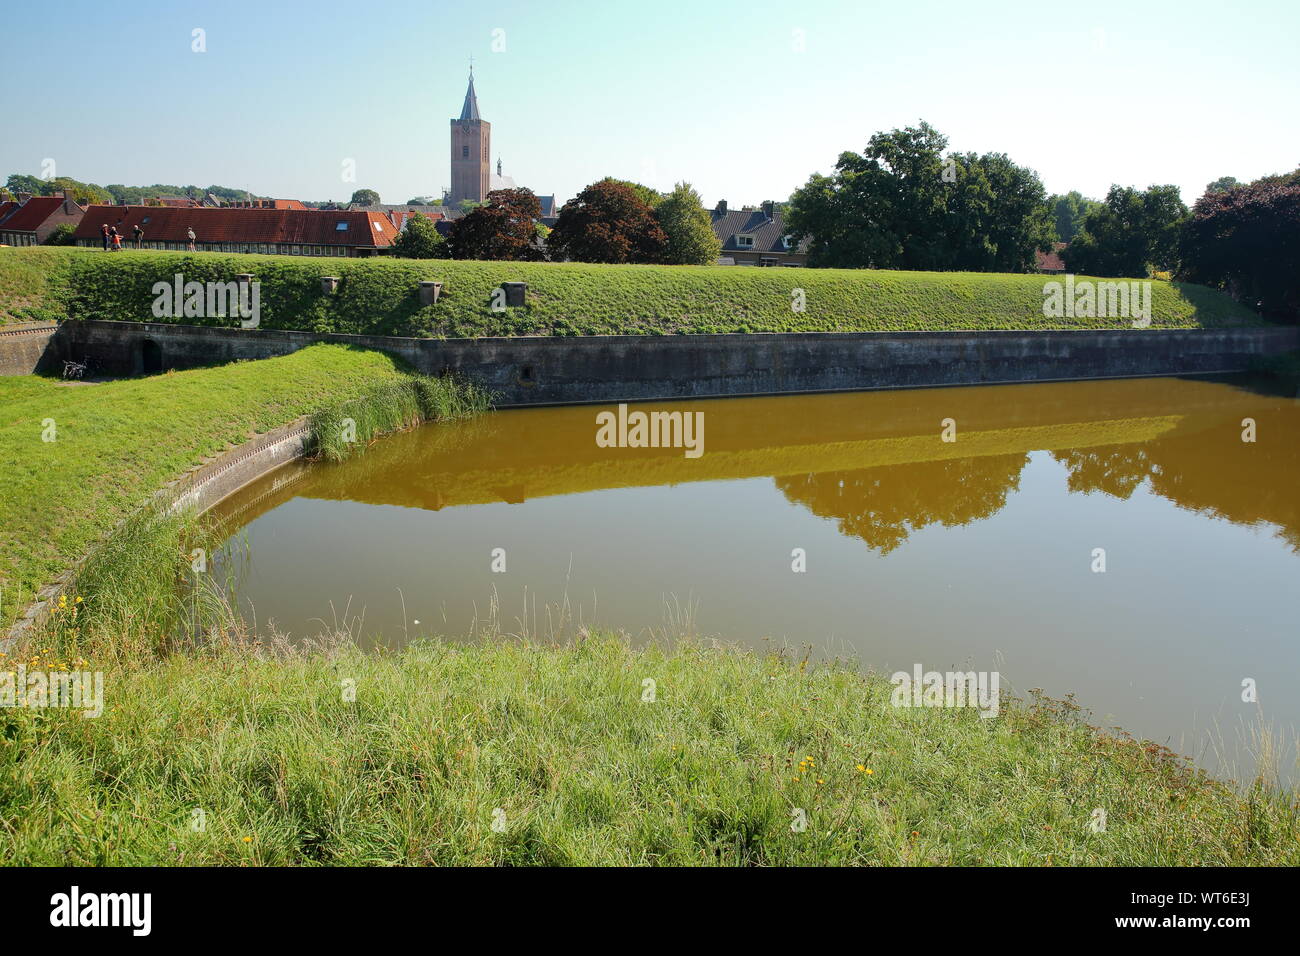 The fortifications and moats of the city of Naarden, Netherlands, with the Grote Kerk church in the background Stock Photo